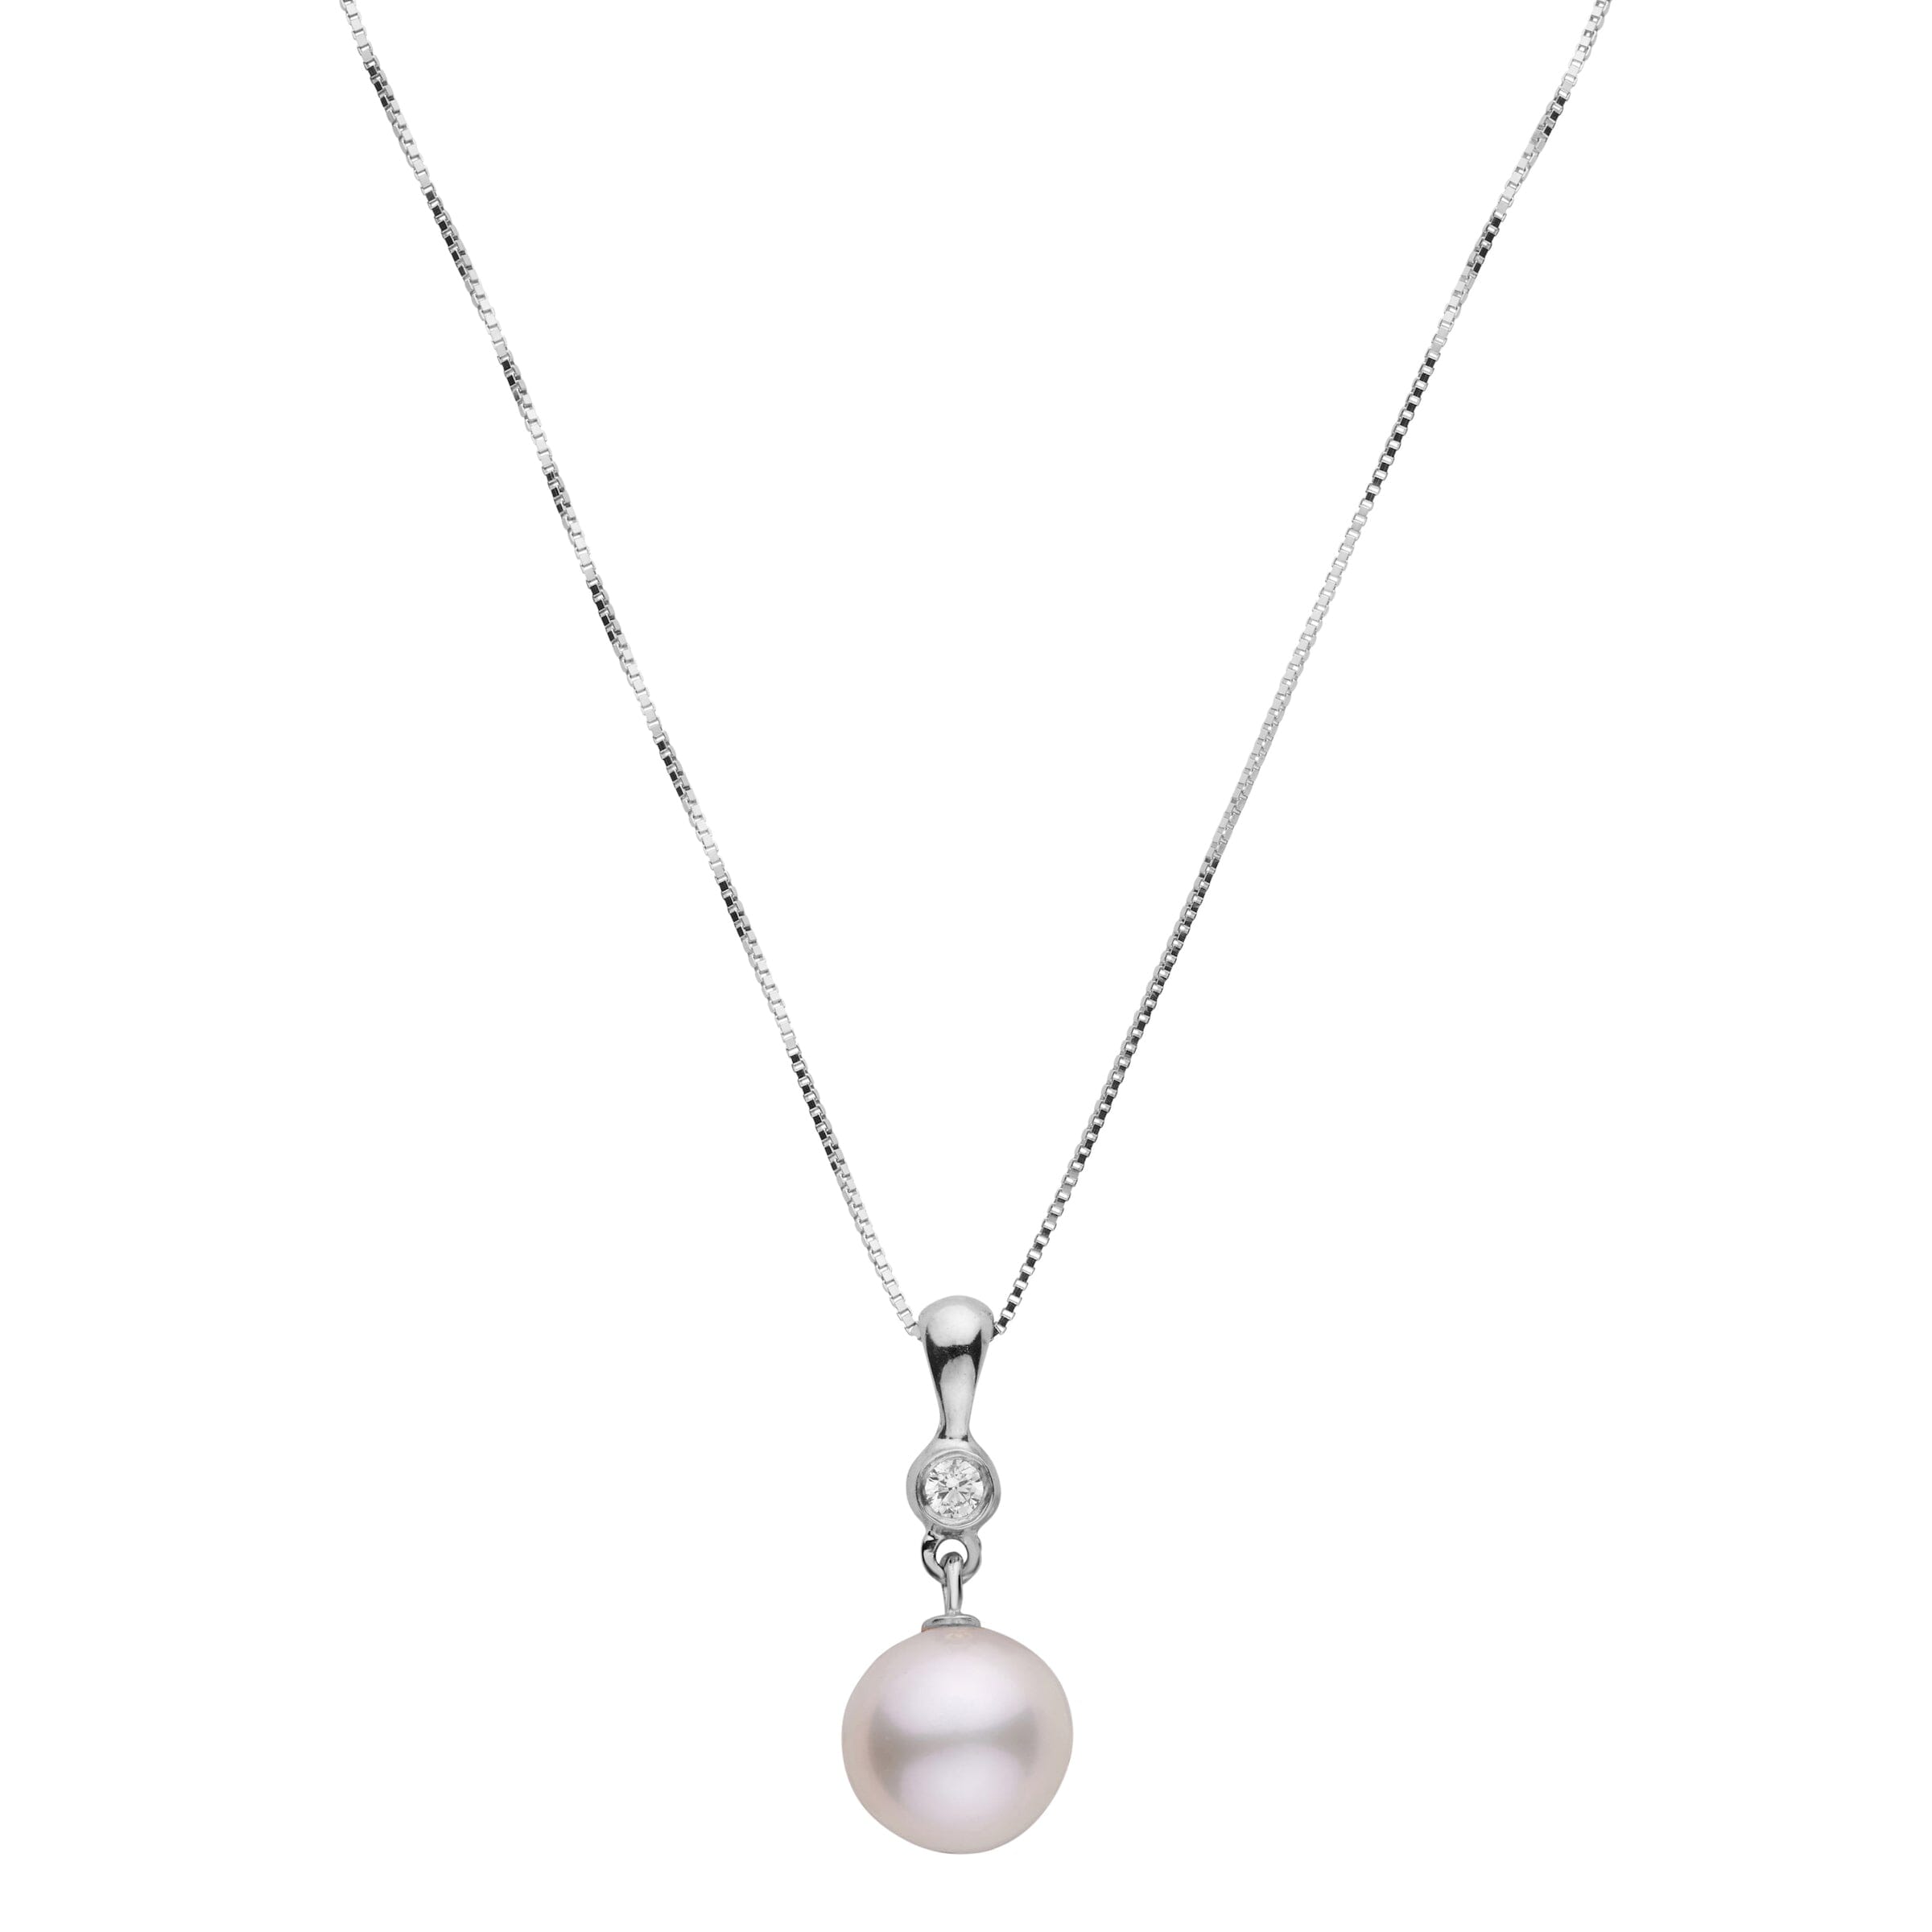 8.0-8.5 mm AAA Lavender Freshwater Pearl and Diamond Romantic Collection Pendant